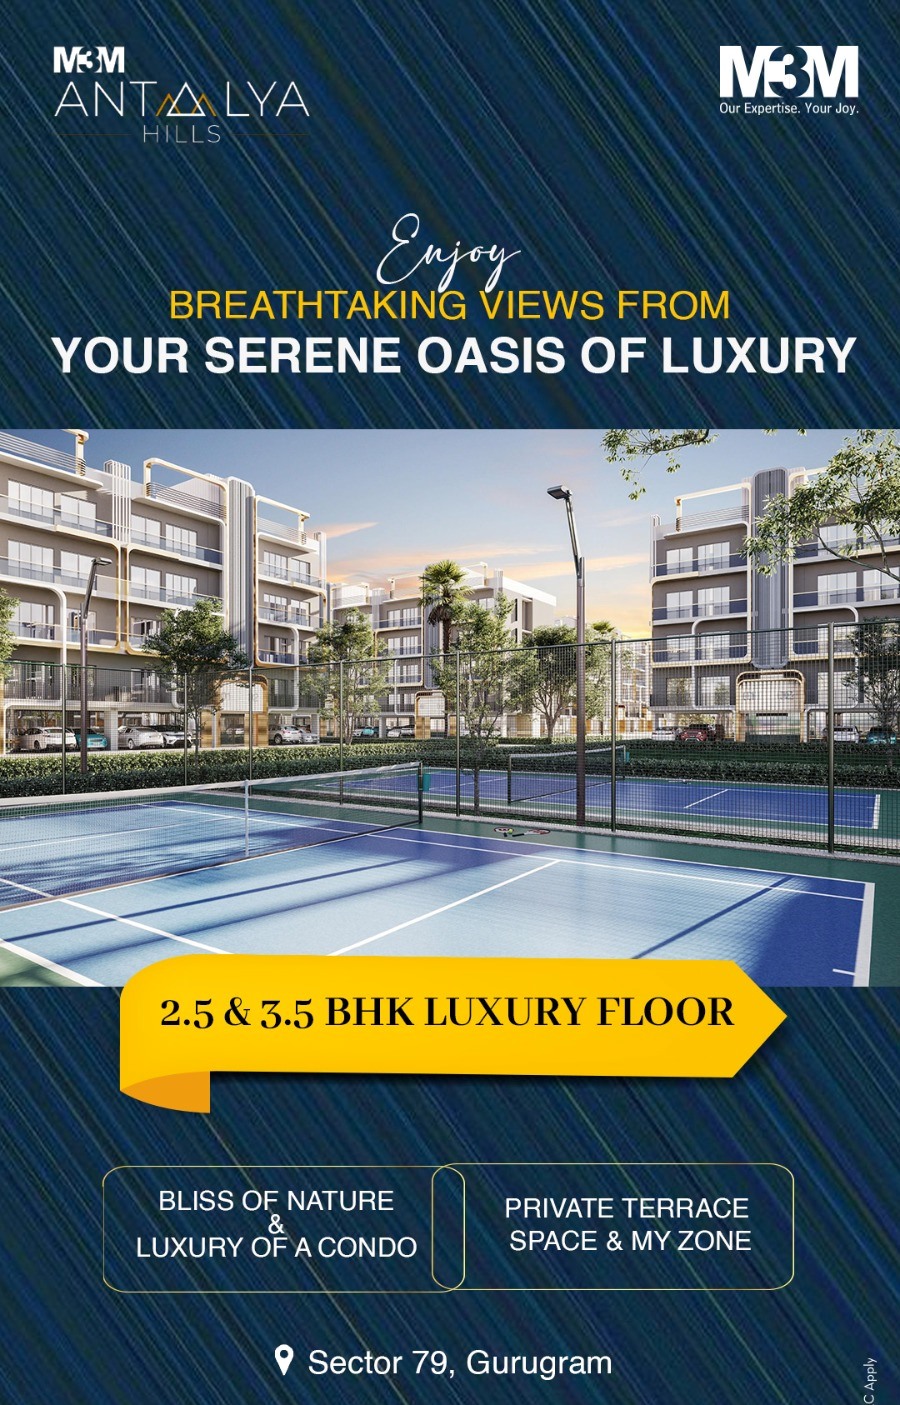 Book 2.5 and 3.5 BHK Luxury floors at M3M Antalya Hills in Sector 79, Gurgaon Update